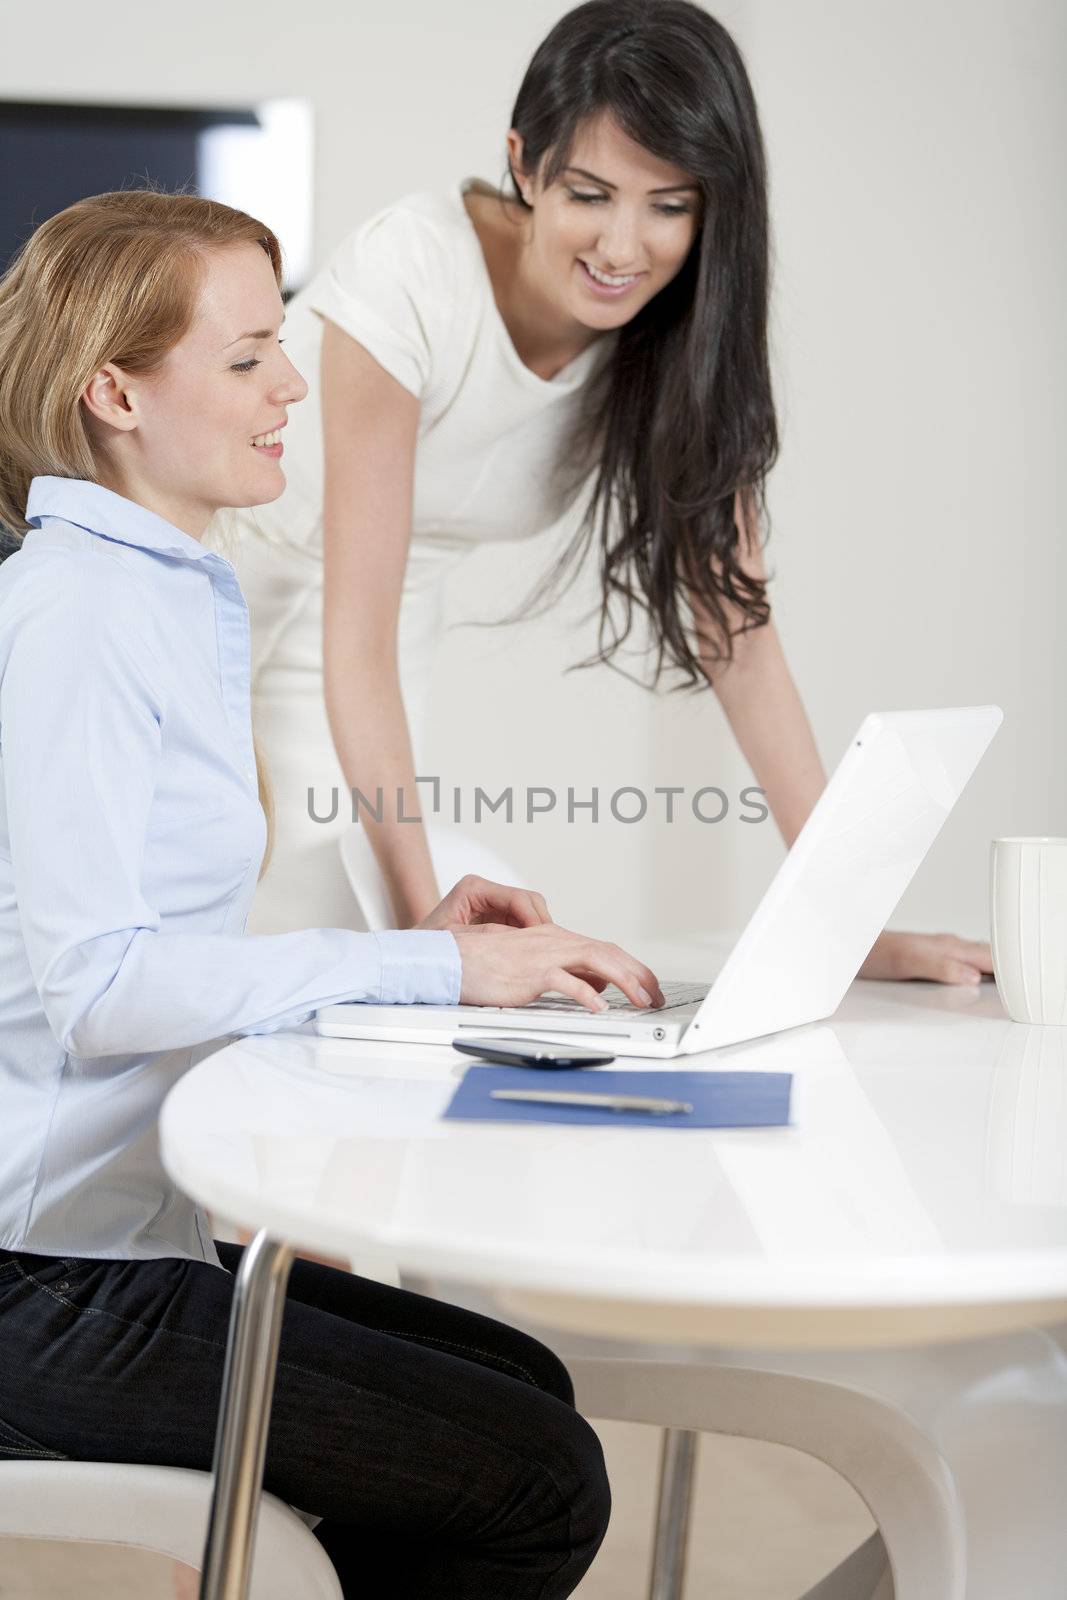 Two colleagues working in an office discussing business